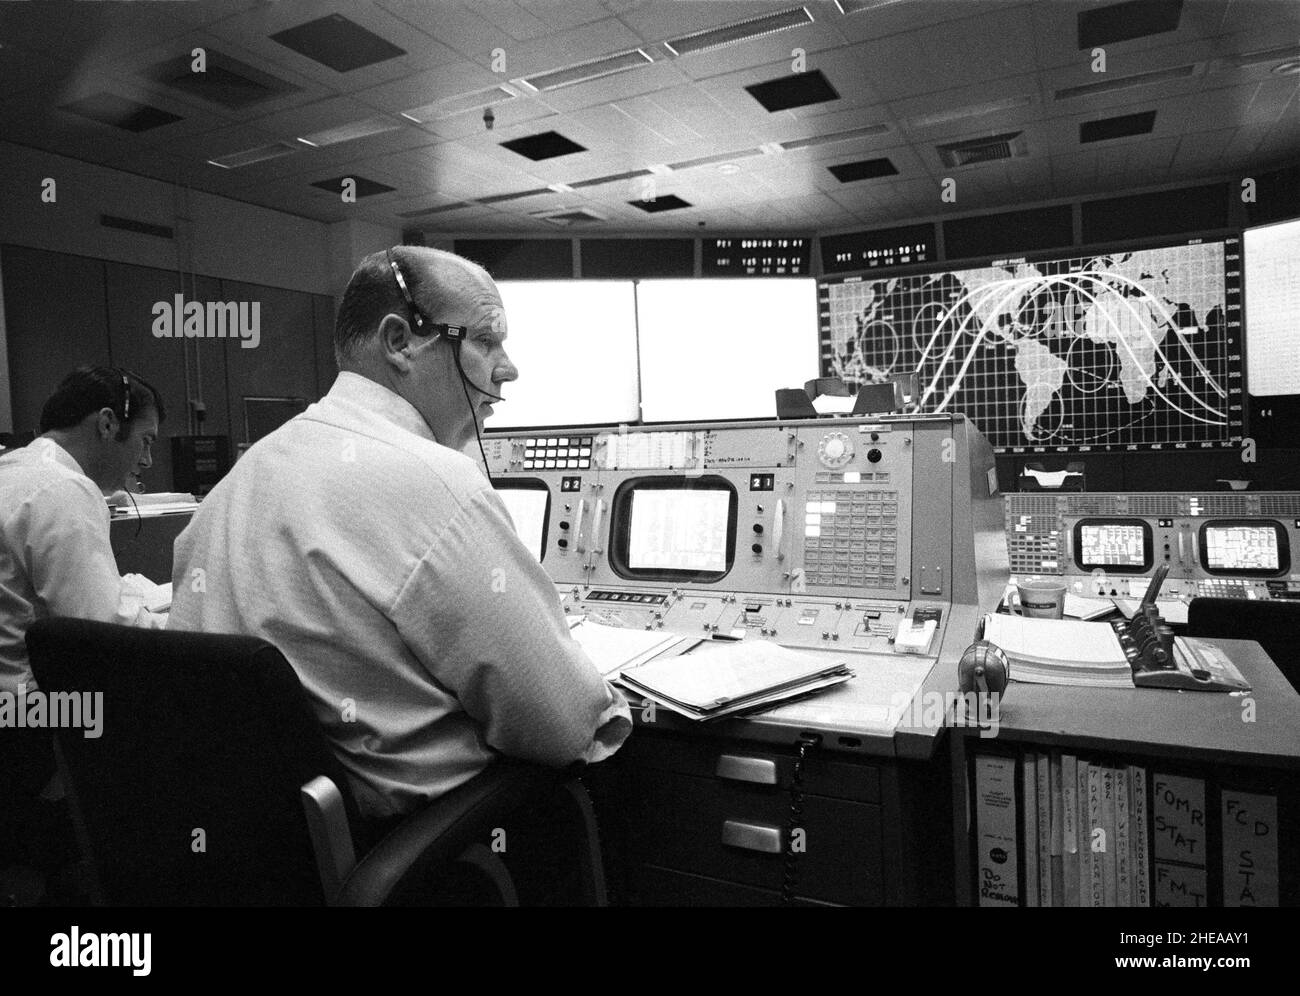 (25 May 1973) --- Flight directors Donald R. Puddy (left background) and Philip C. Shaffer are seated at the flight director's console in the Mission Operations Control Room in the Mission Control Center at JSC during Skylab 2 launch activity. Stock Photo